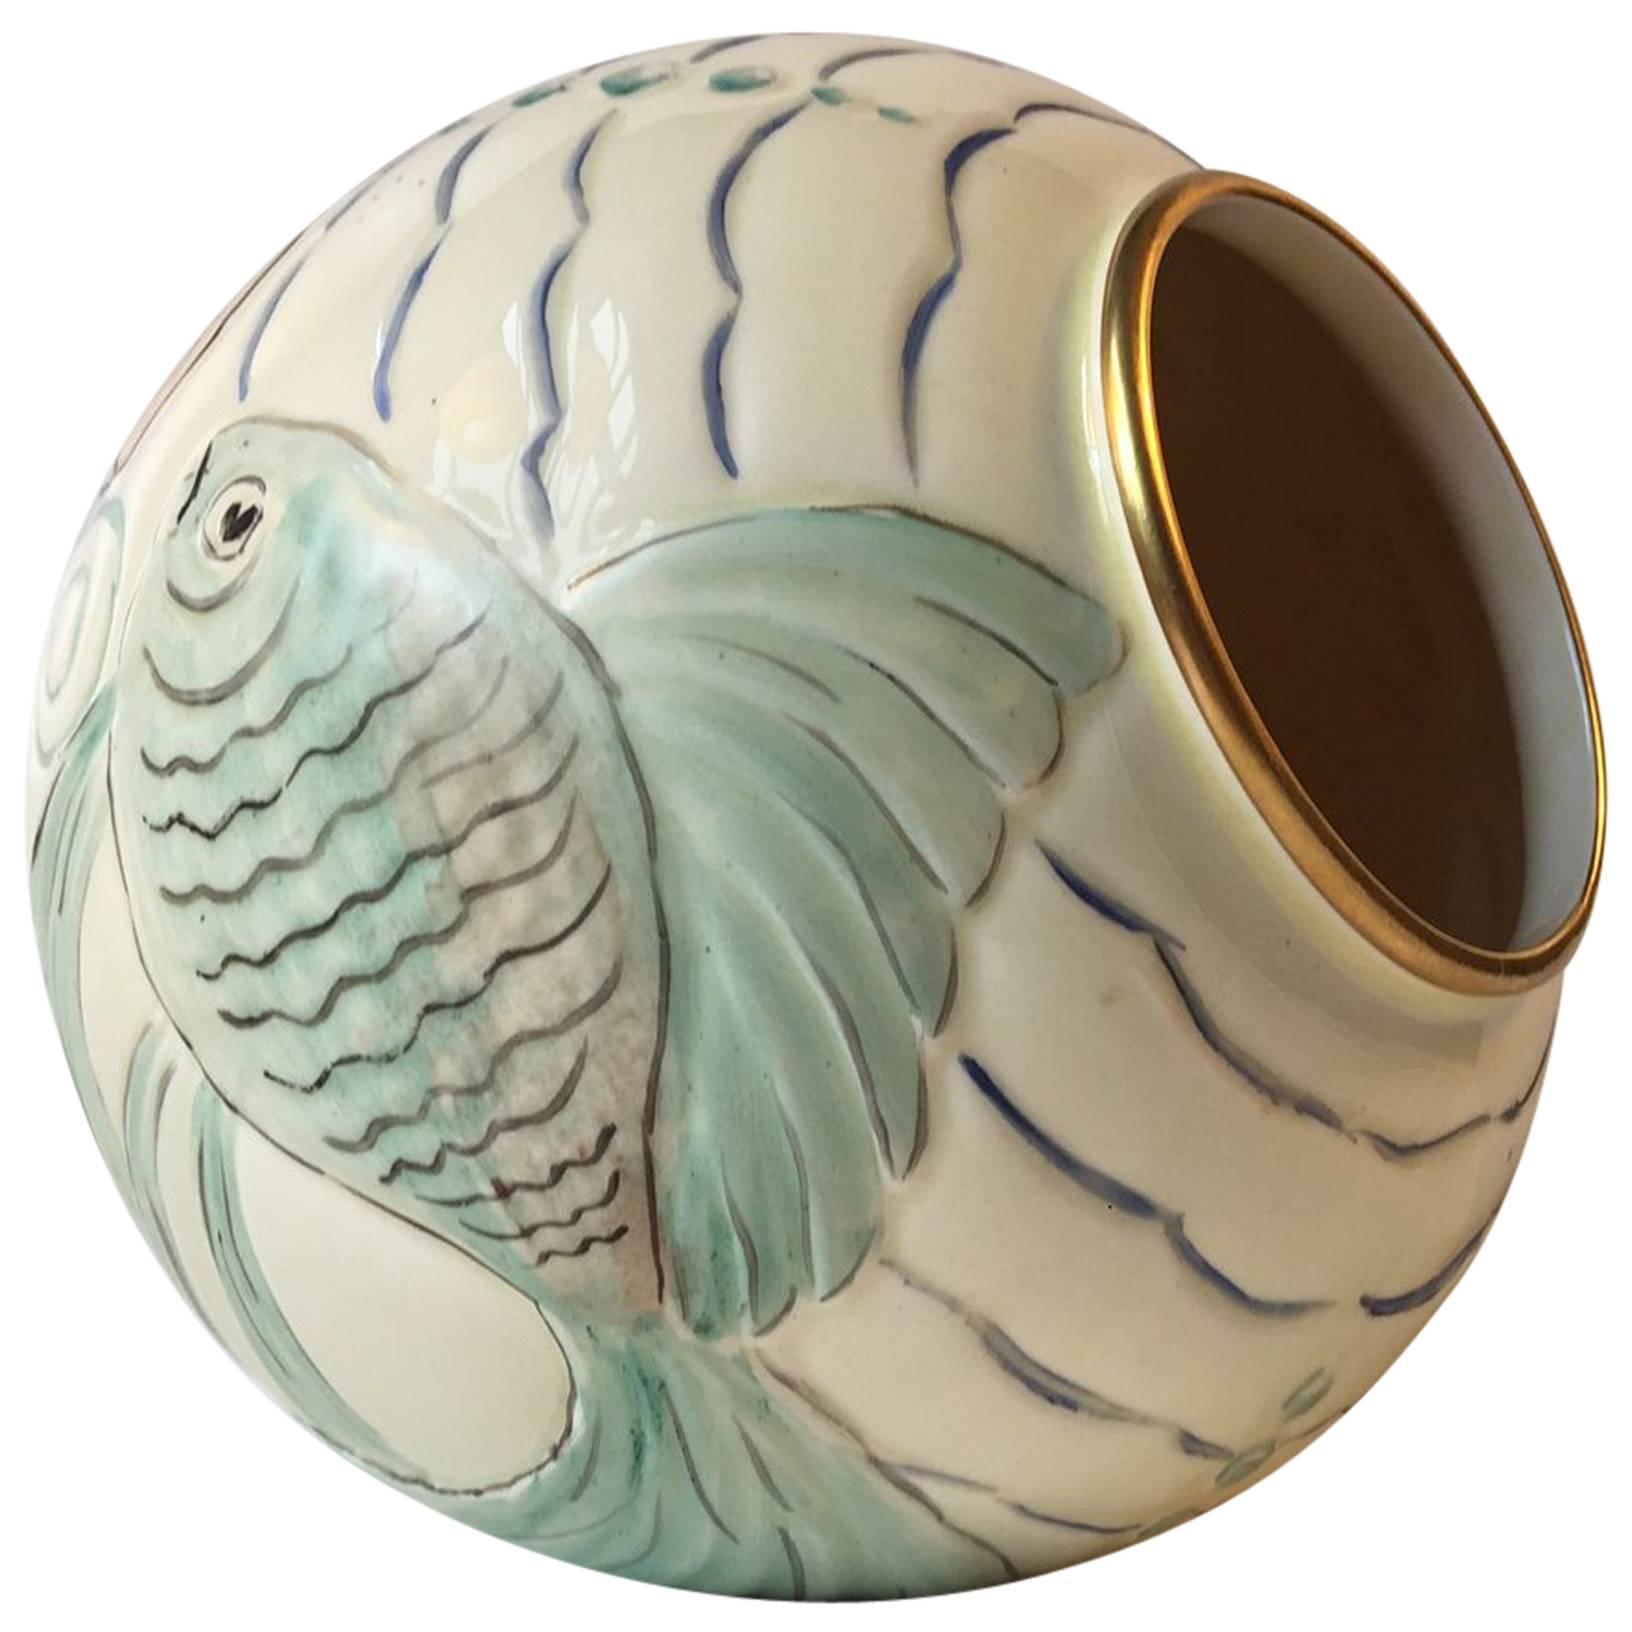 Art Deco Porcelain Ball Vase with 'Fish' Motif's by Spode's Royal Jasmine, 1930s